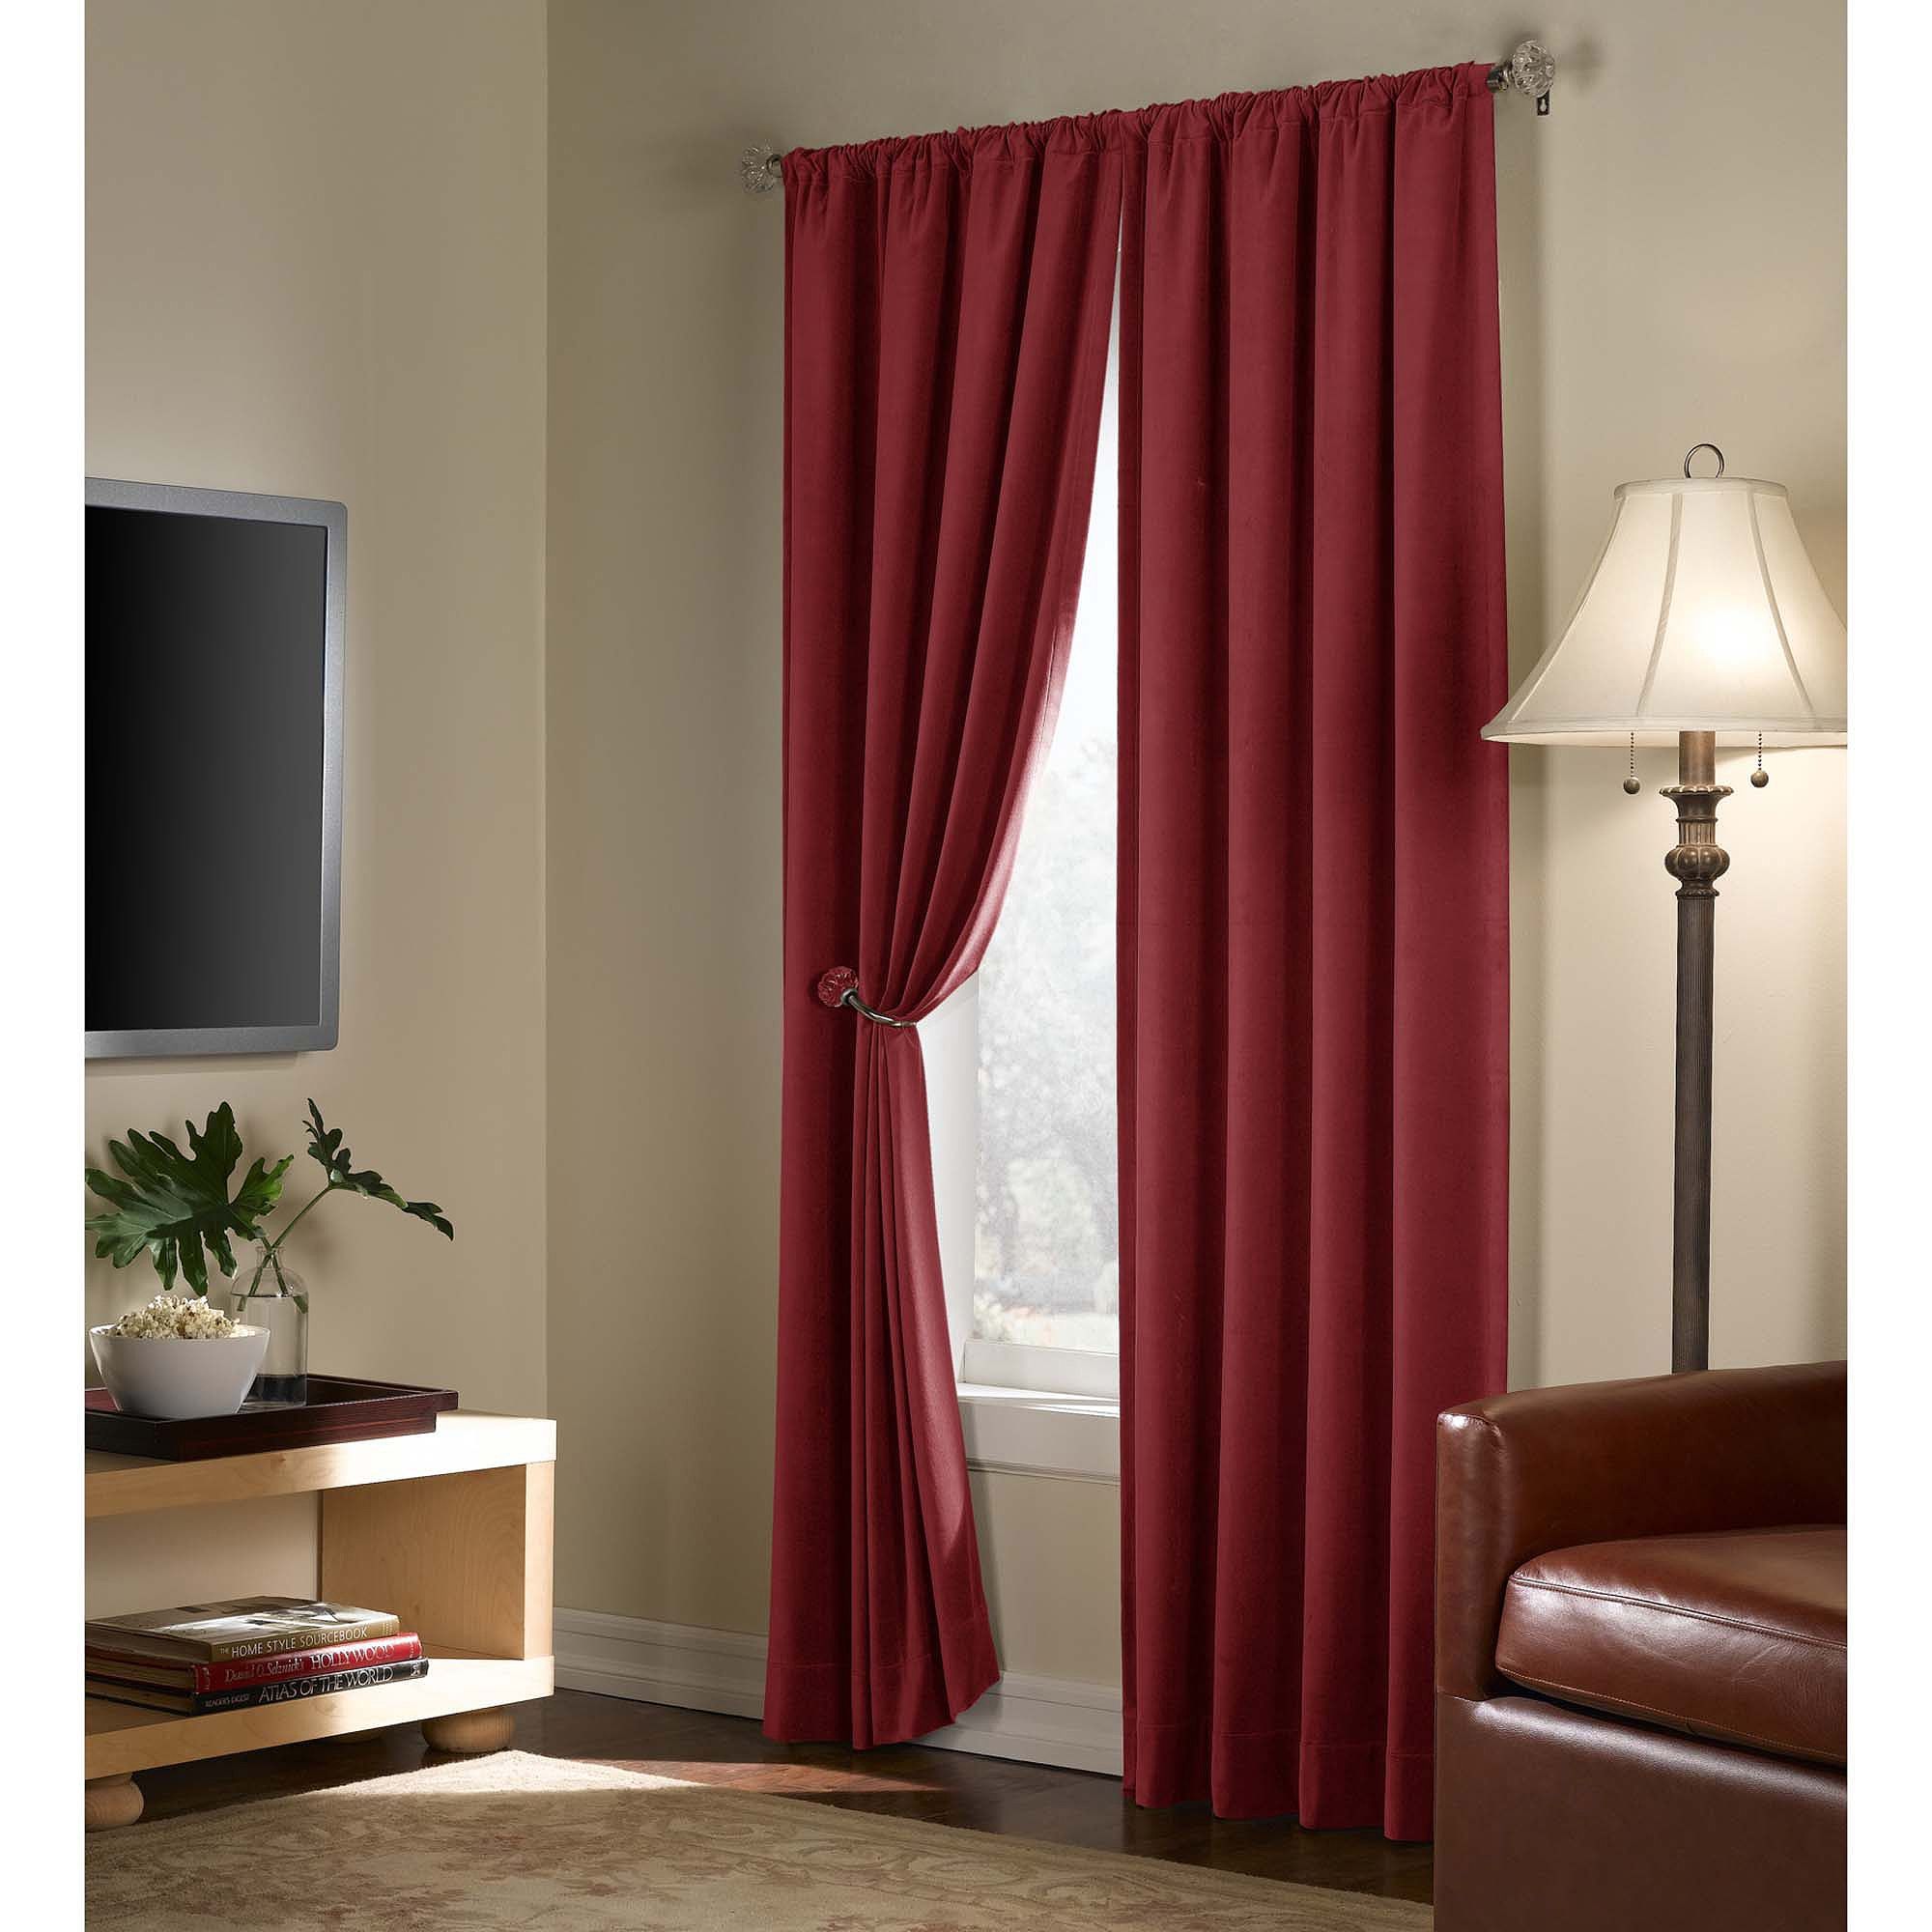 Curtain Curtains At Walmart For Elegant Home Accessories Design Pertaining To Double Panel Shower Curtains (View 12 of 25)